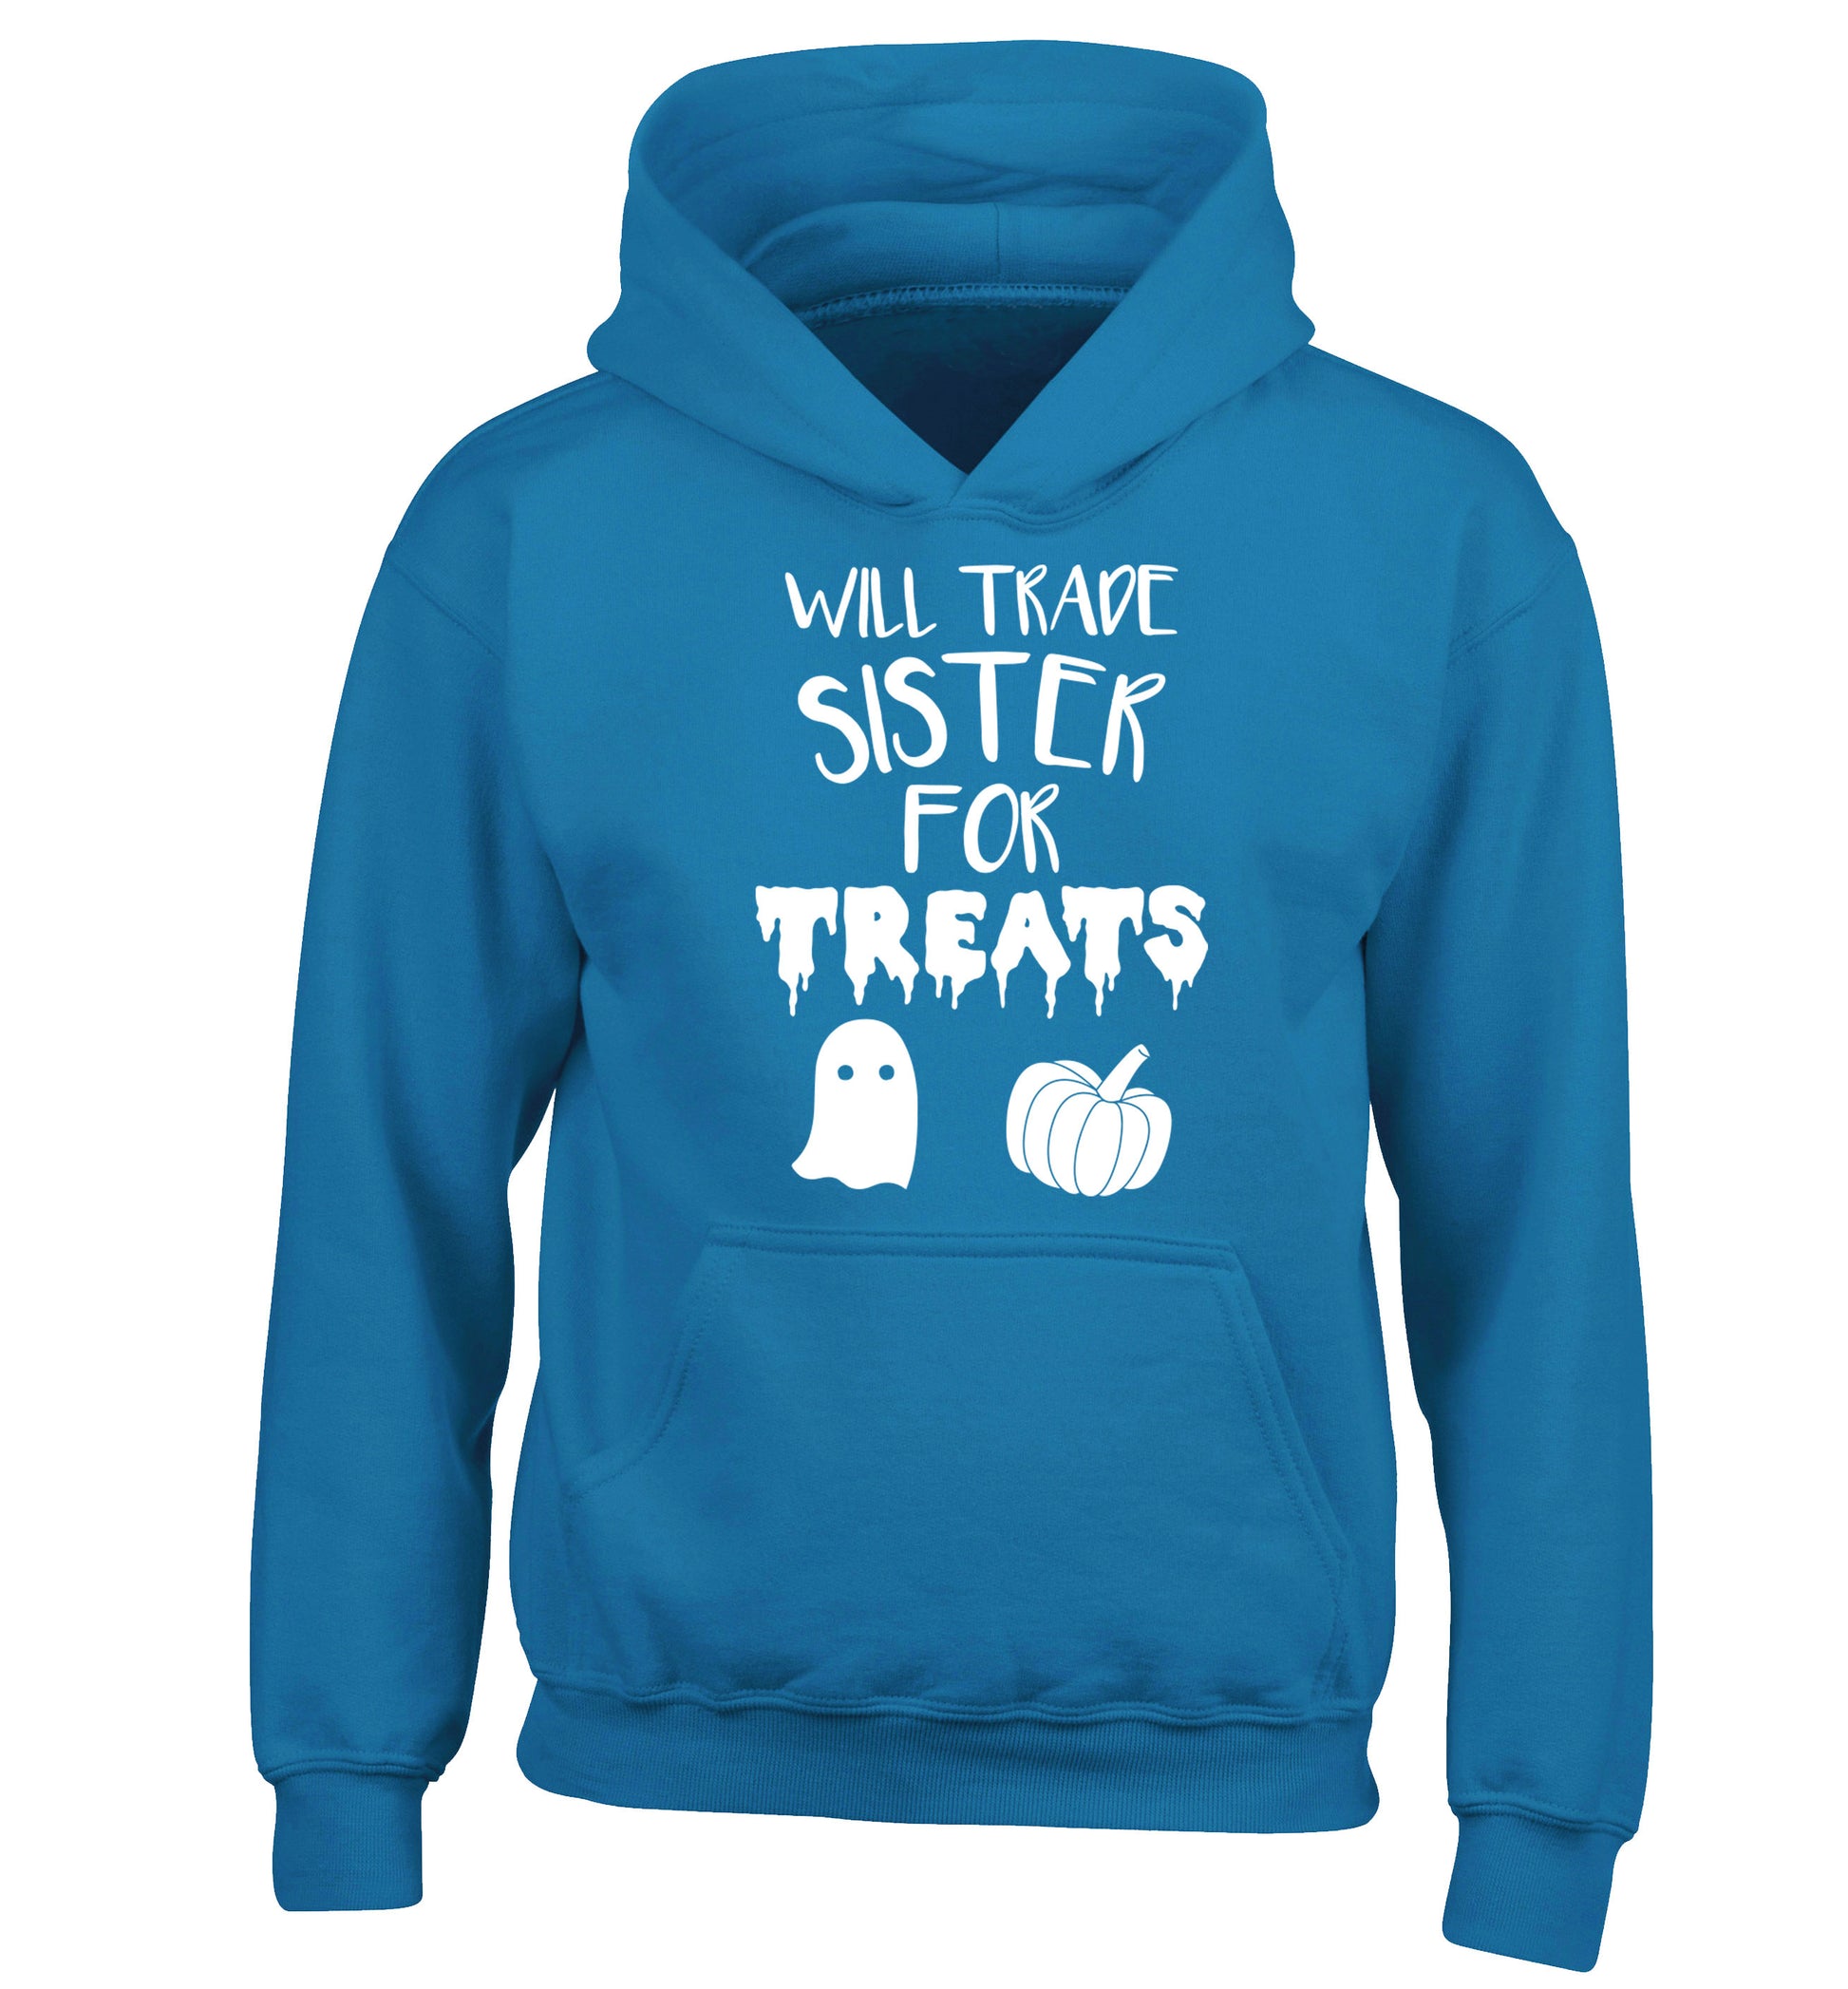 Will trade sister for treats children's blue hoodie 12-14 Years